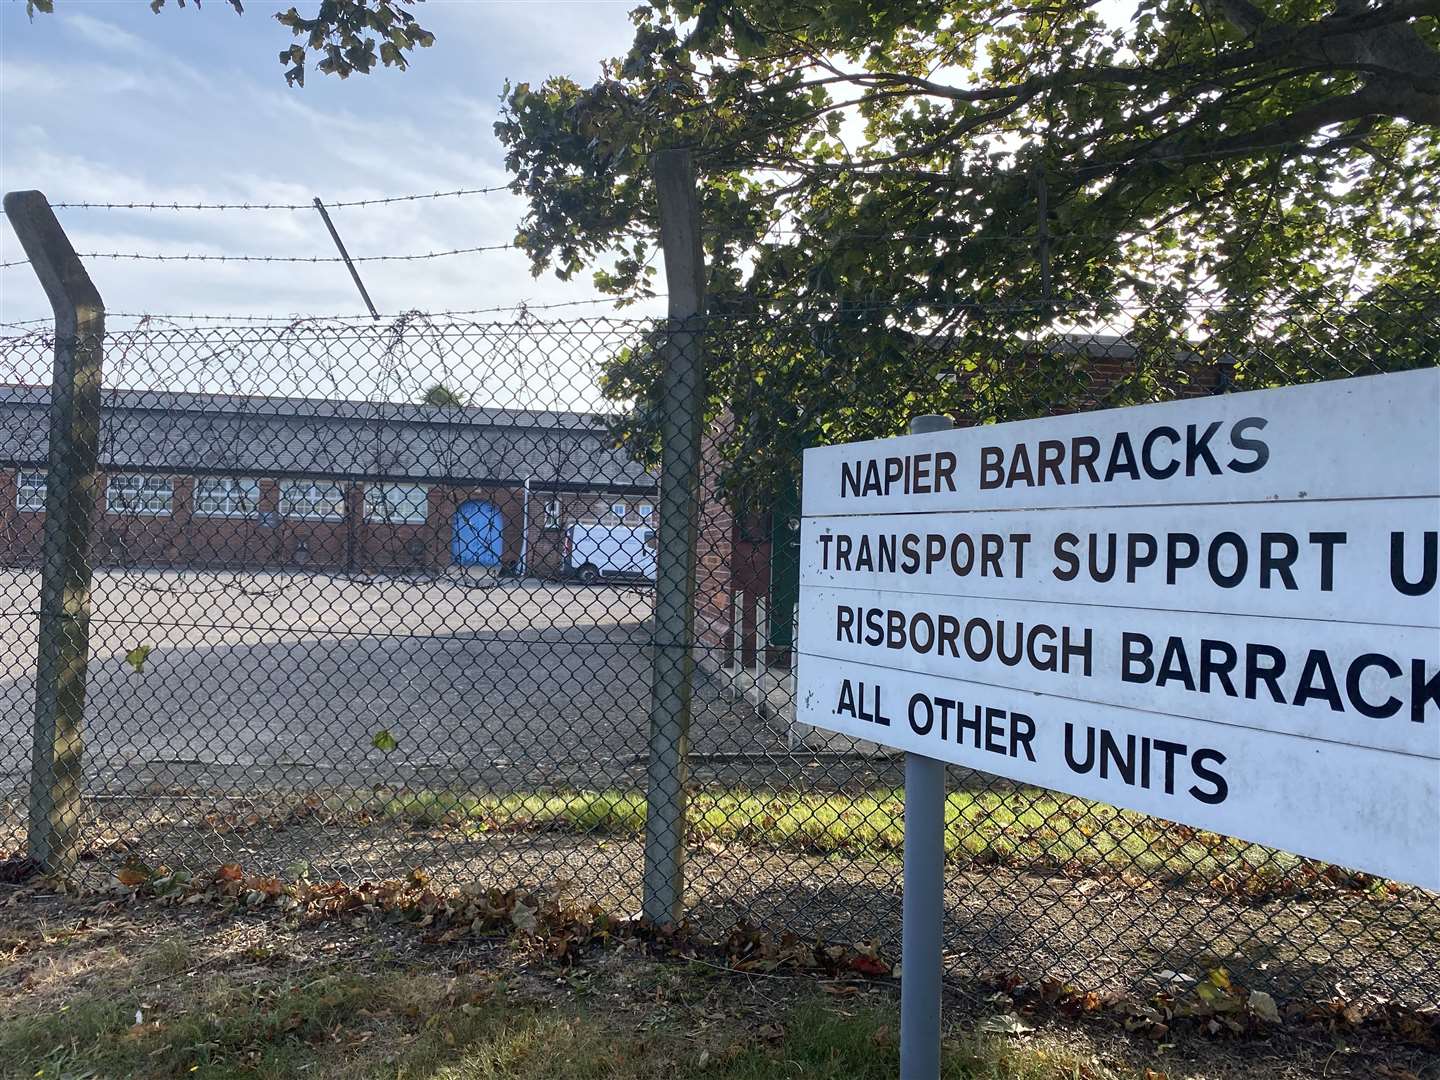 The Army base is due to house asylum seekers until next autumn